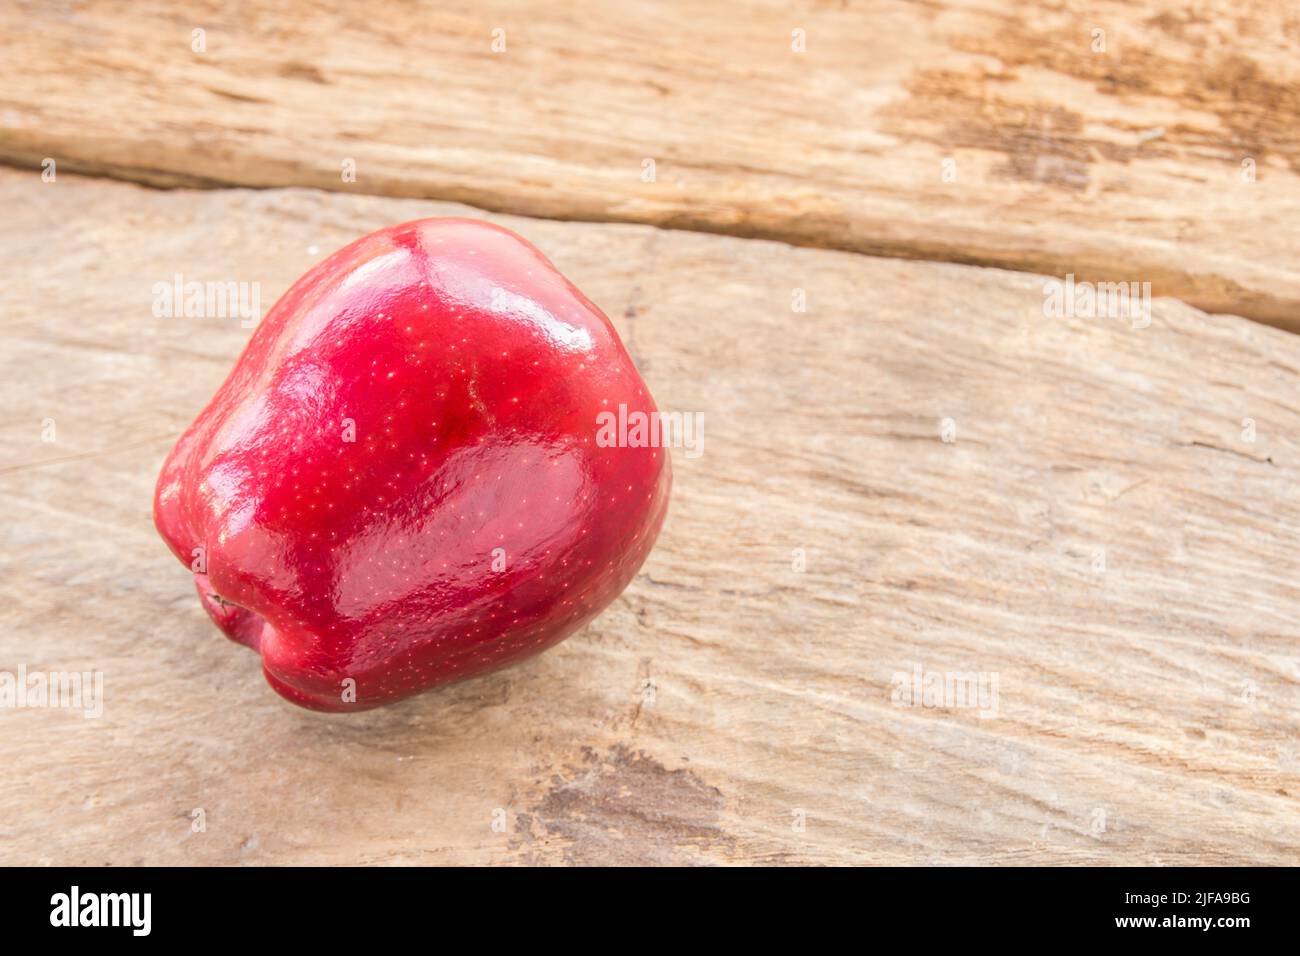 Fresh red apple on wooden table background Stock Photo